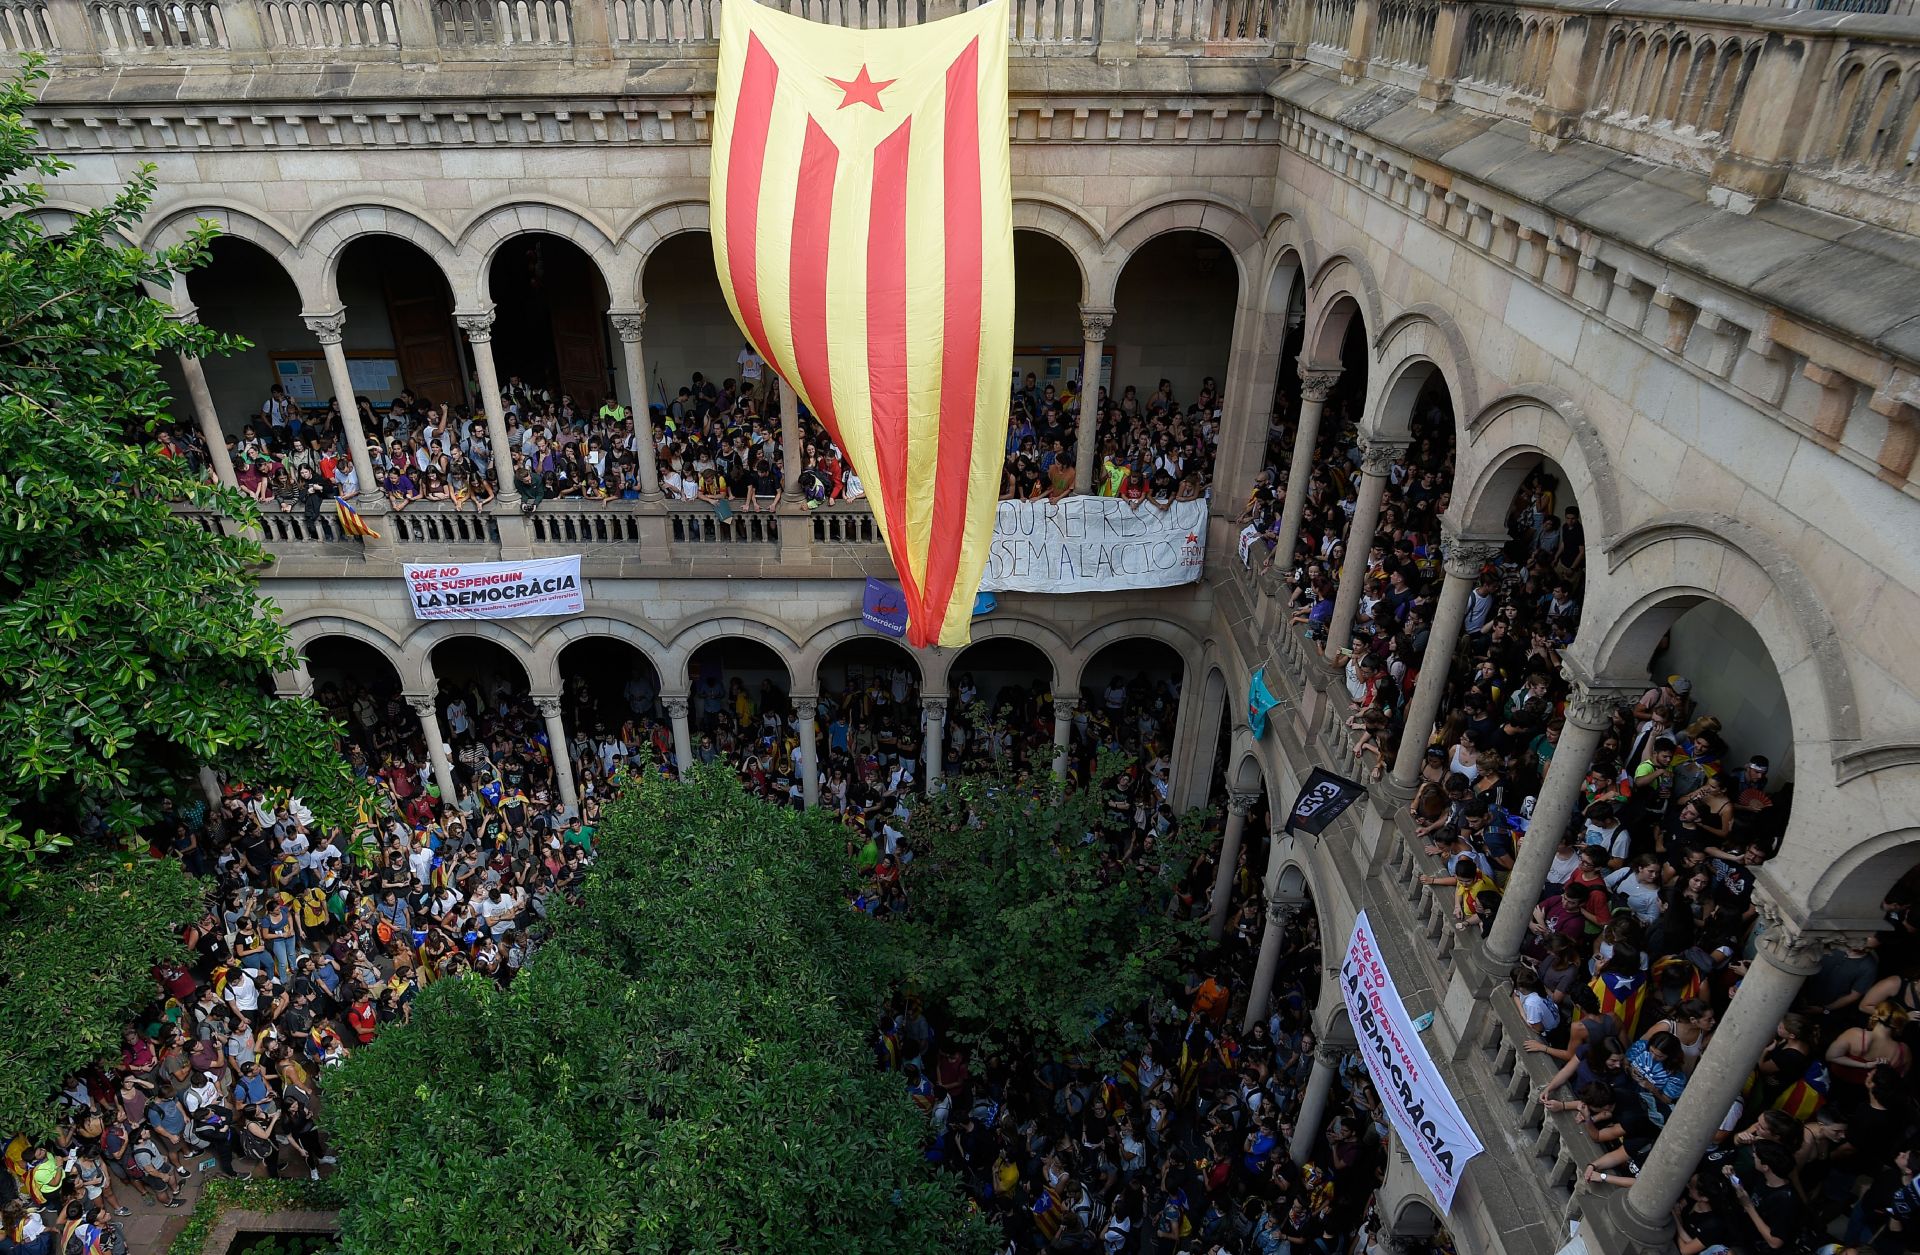 The Spanish central government is using legal, political and economic means to block an independence referendum in Catalonia.